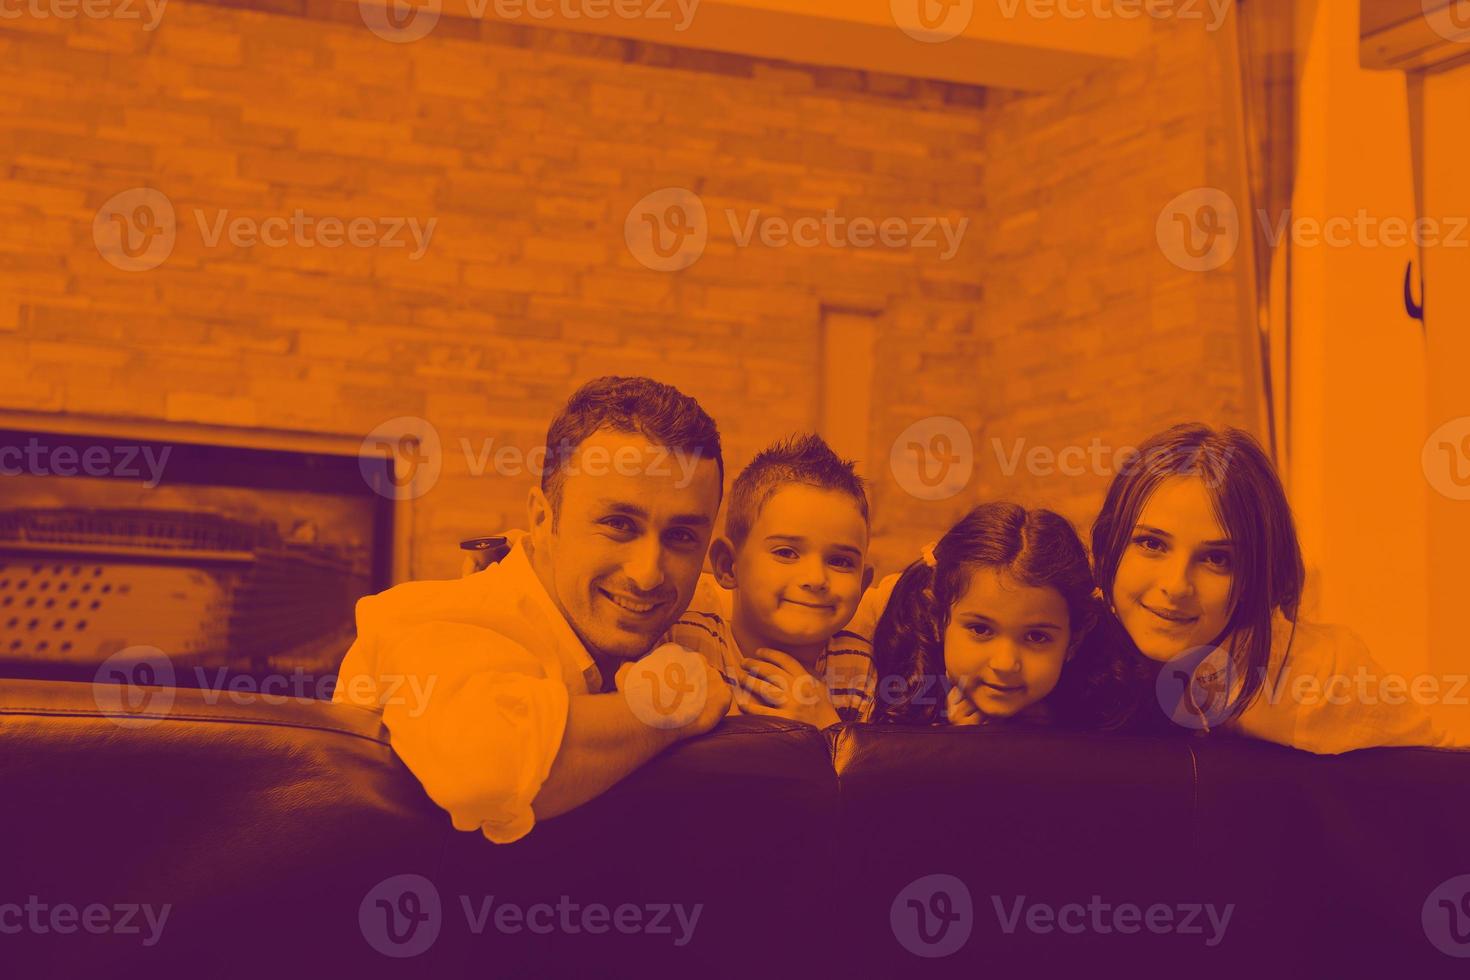 young family at home photo